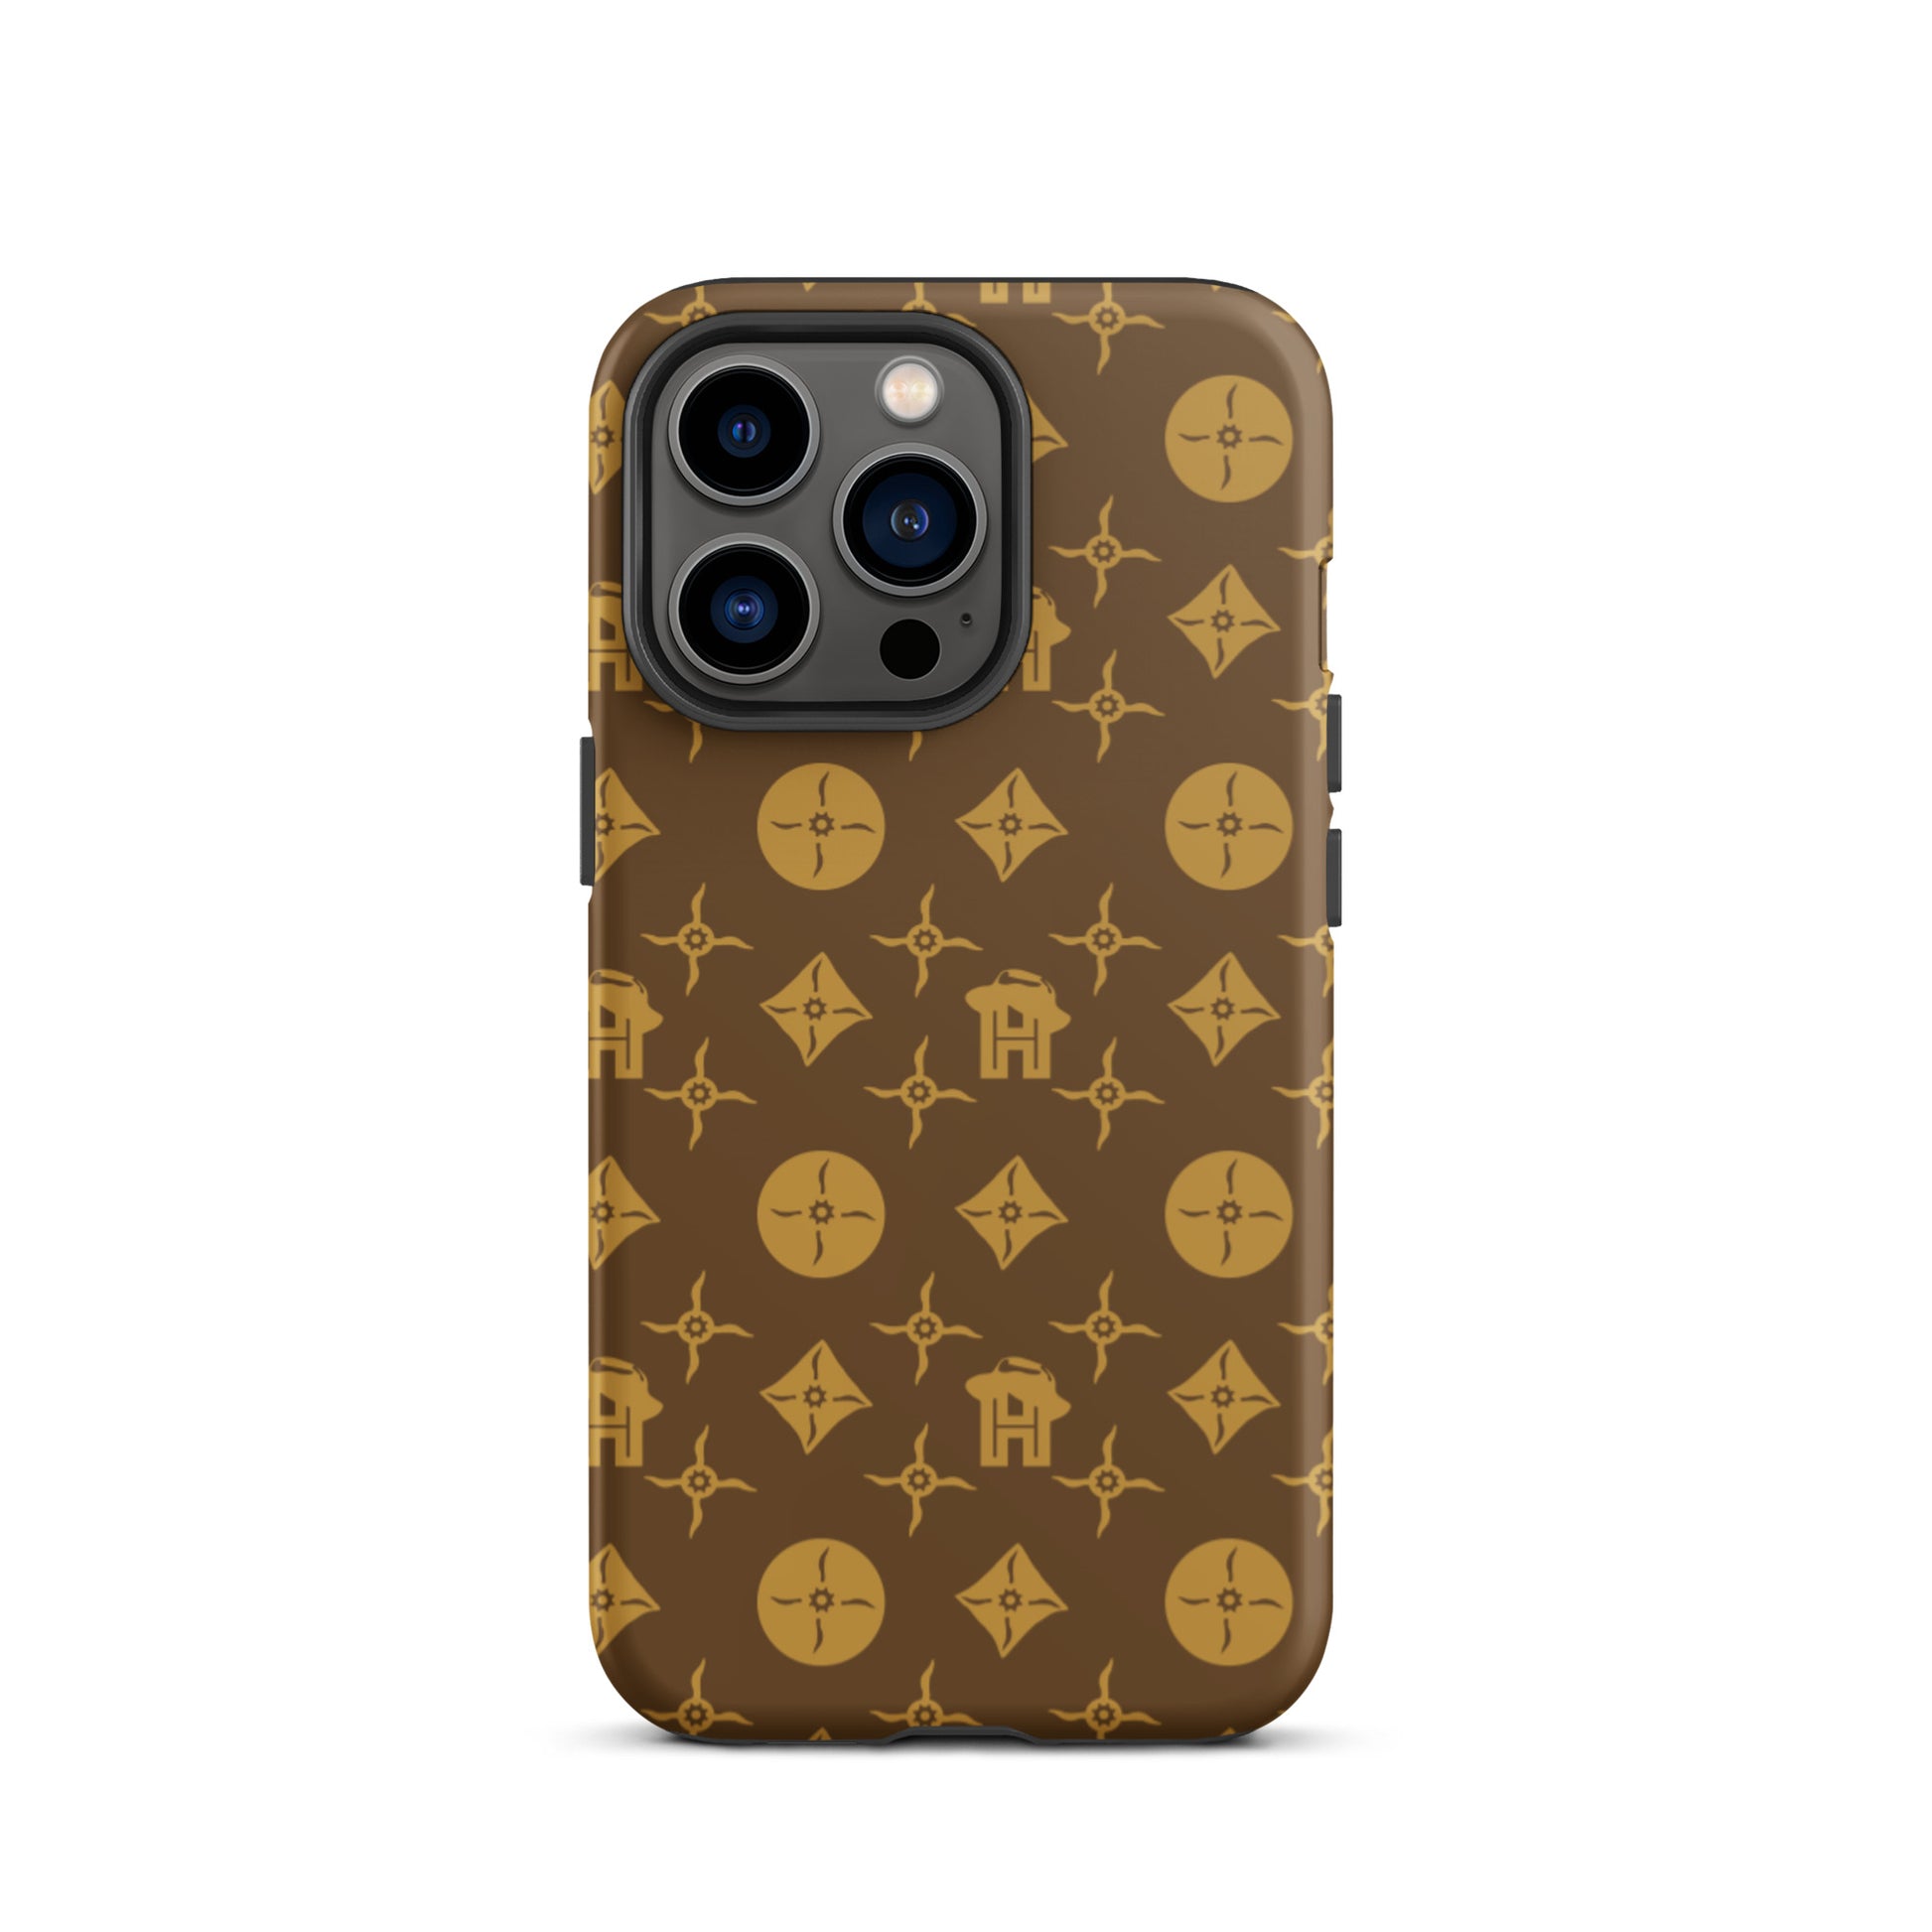 Gold and Brown Monogram Tough iPhone case - HipHatter